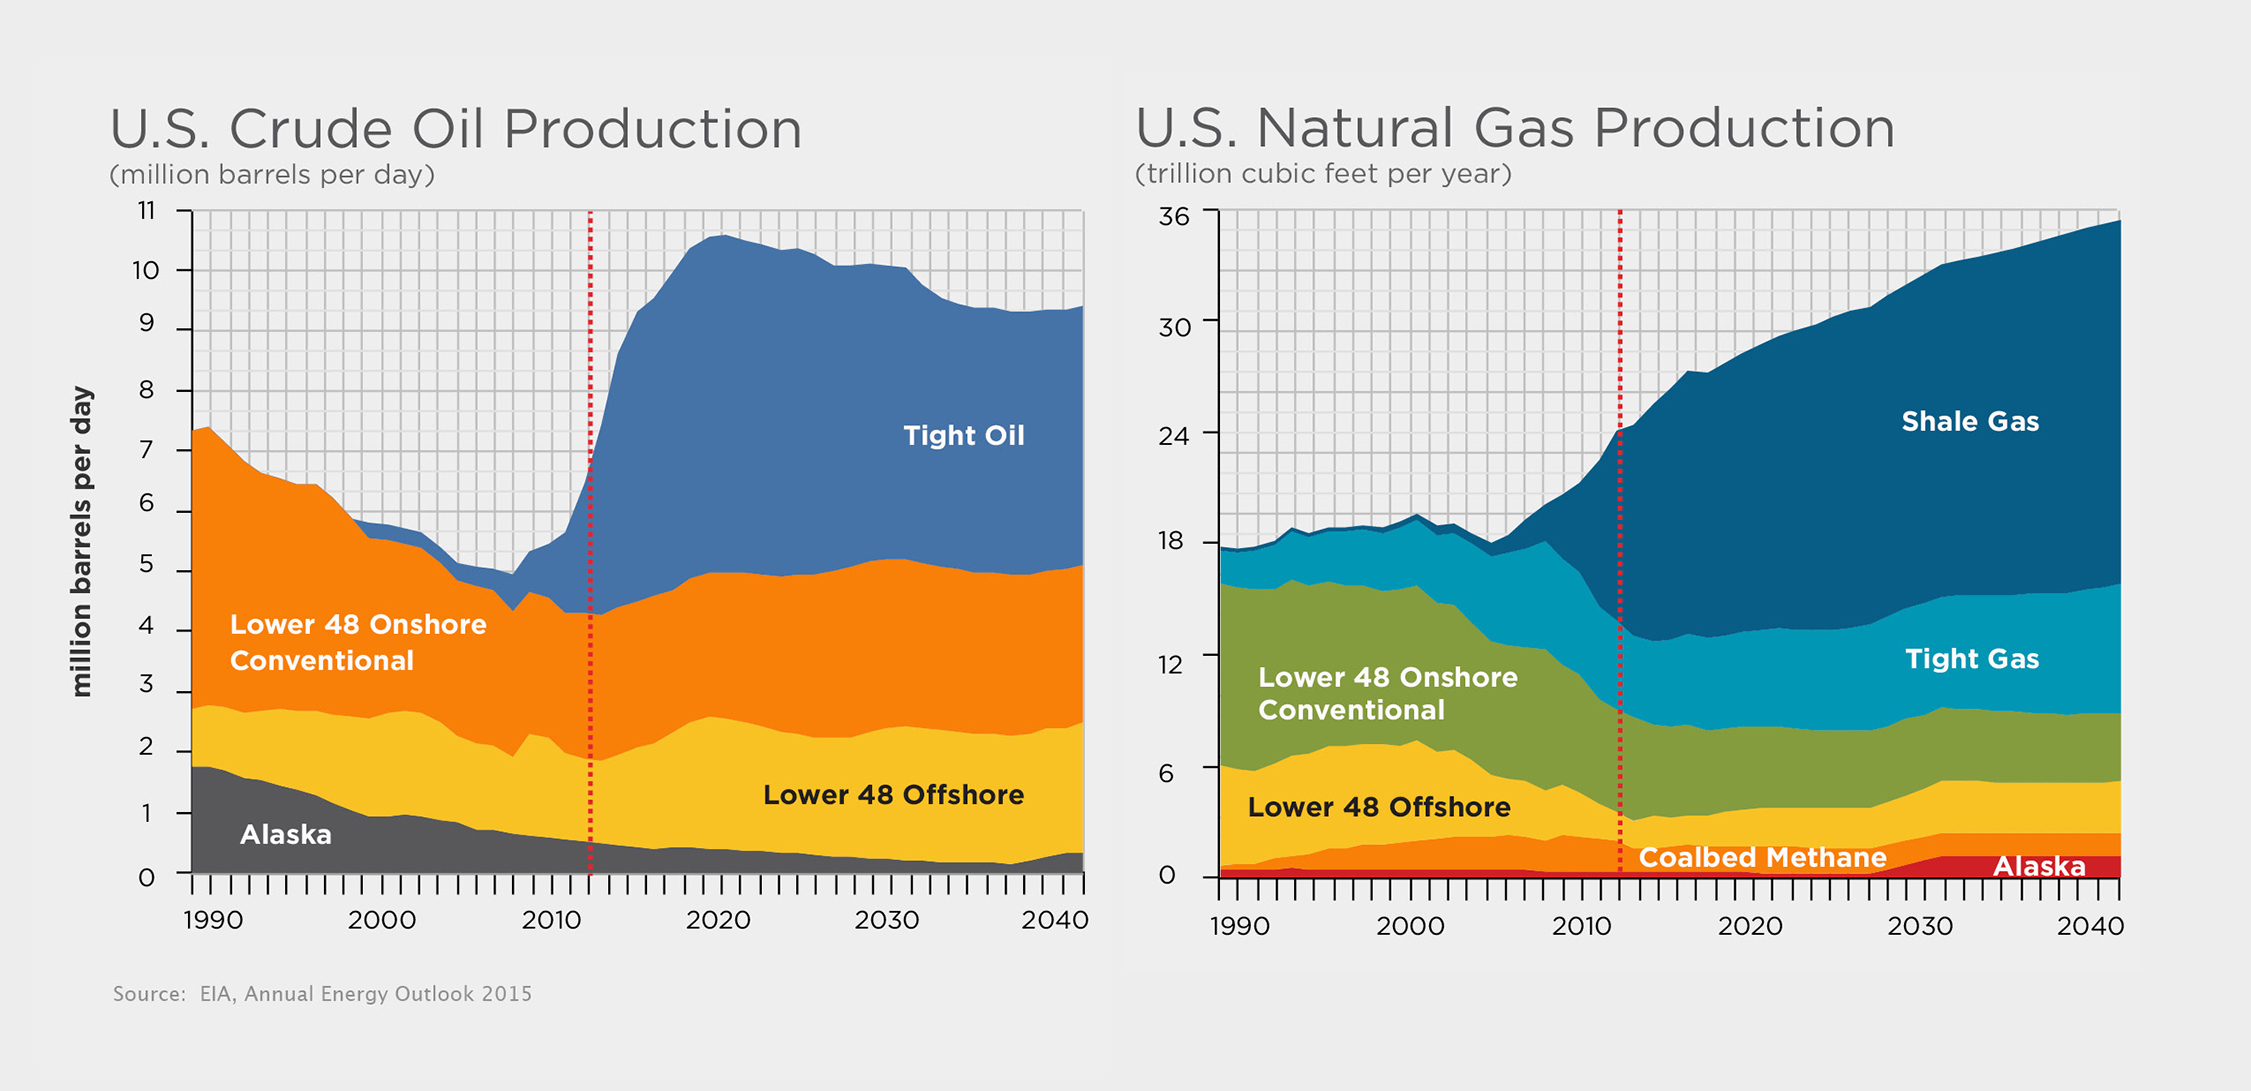 Image from: http://www.api.org/~/media/APIWebsite/oil-and-natural-gas/primers/us-crude-and-gas-production-by-source.png?la=en, last accessed 5/30/17.